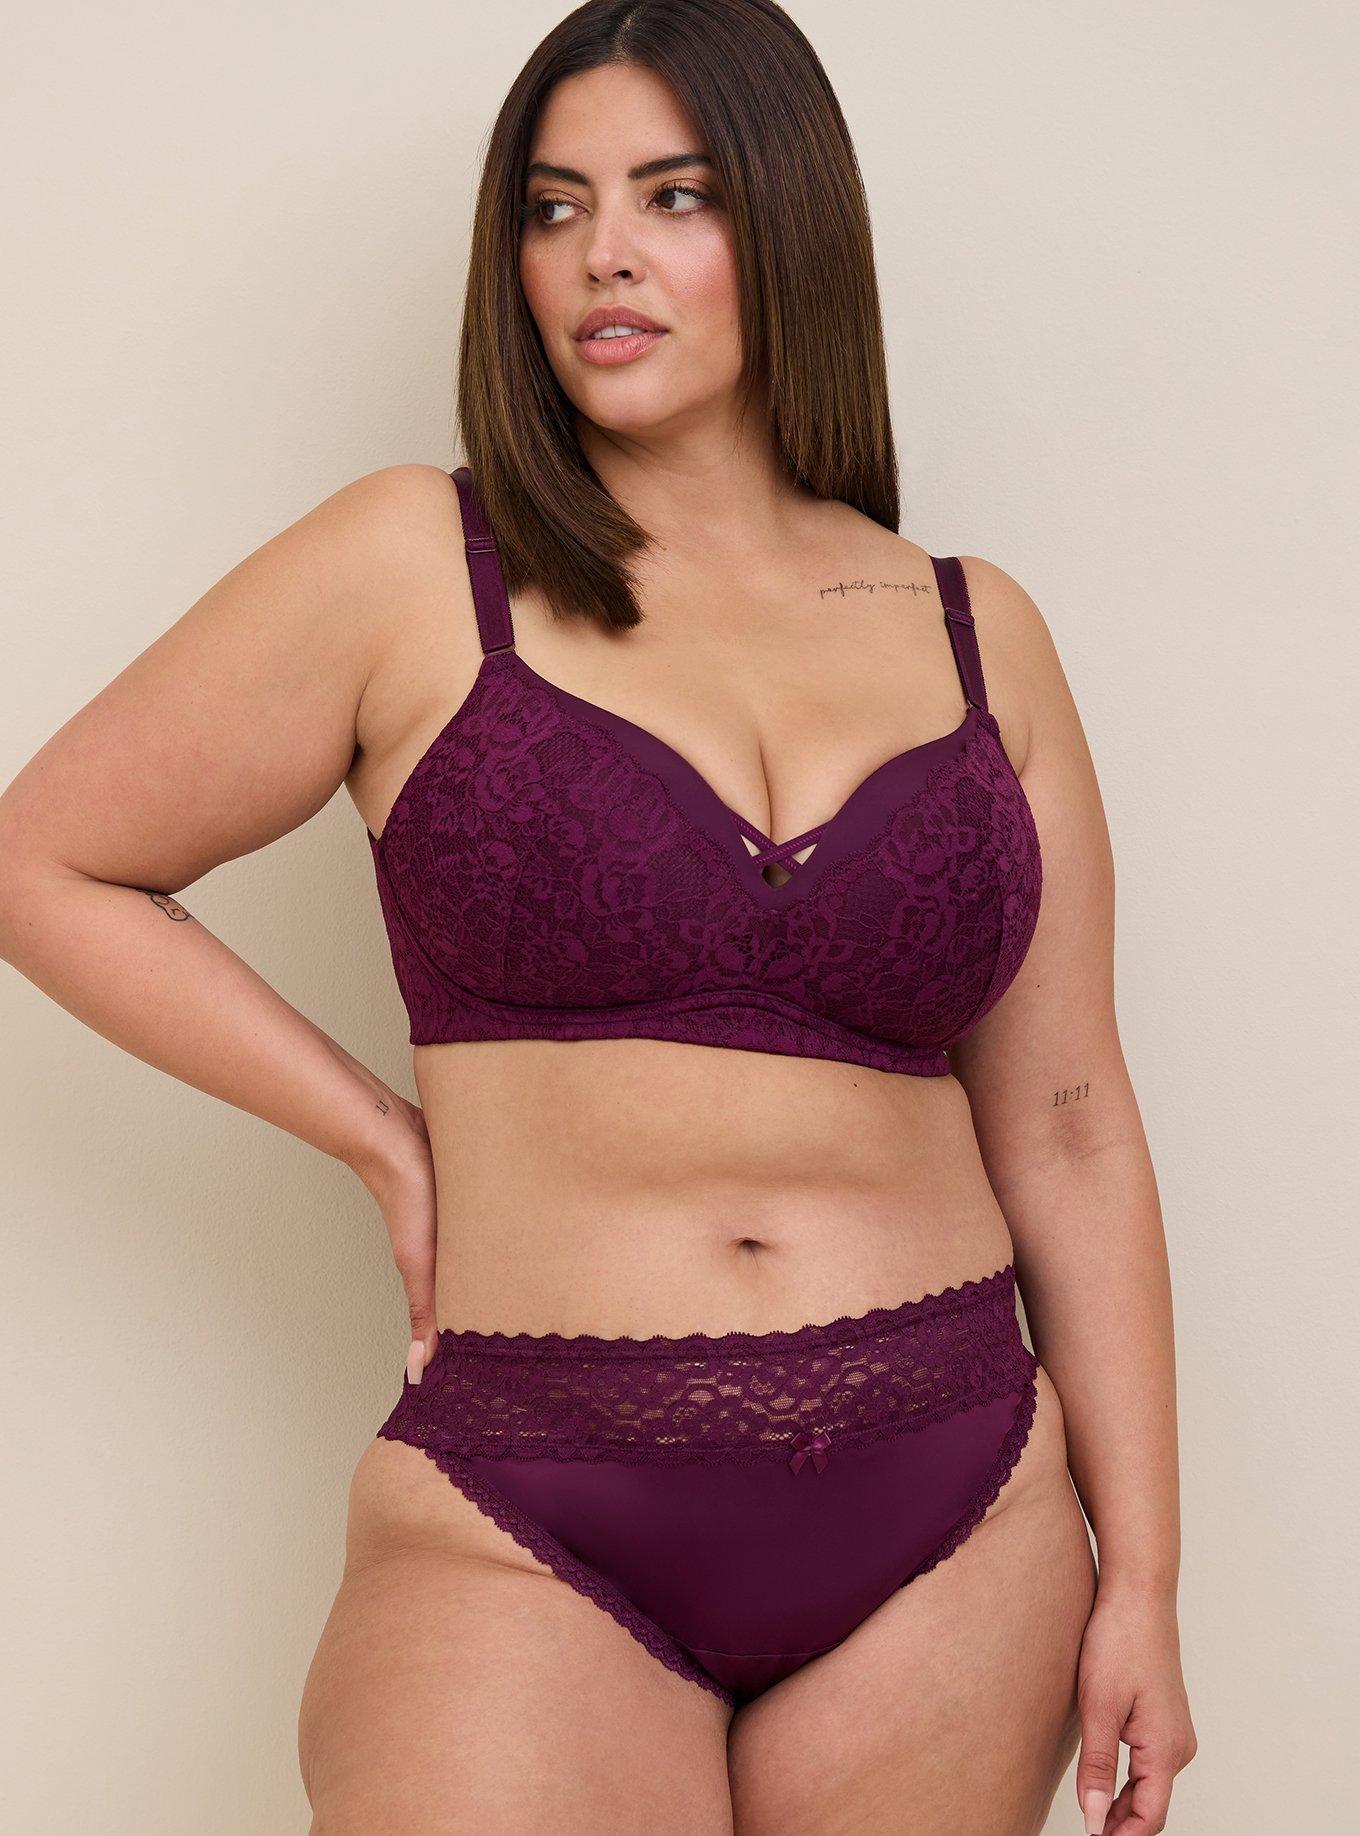 Torrid - Sexy, cute, supportive, and what you need at 40% OFF